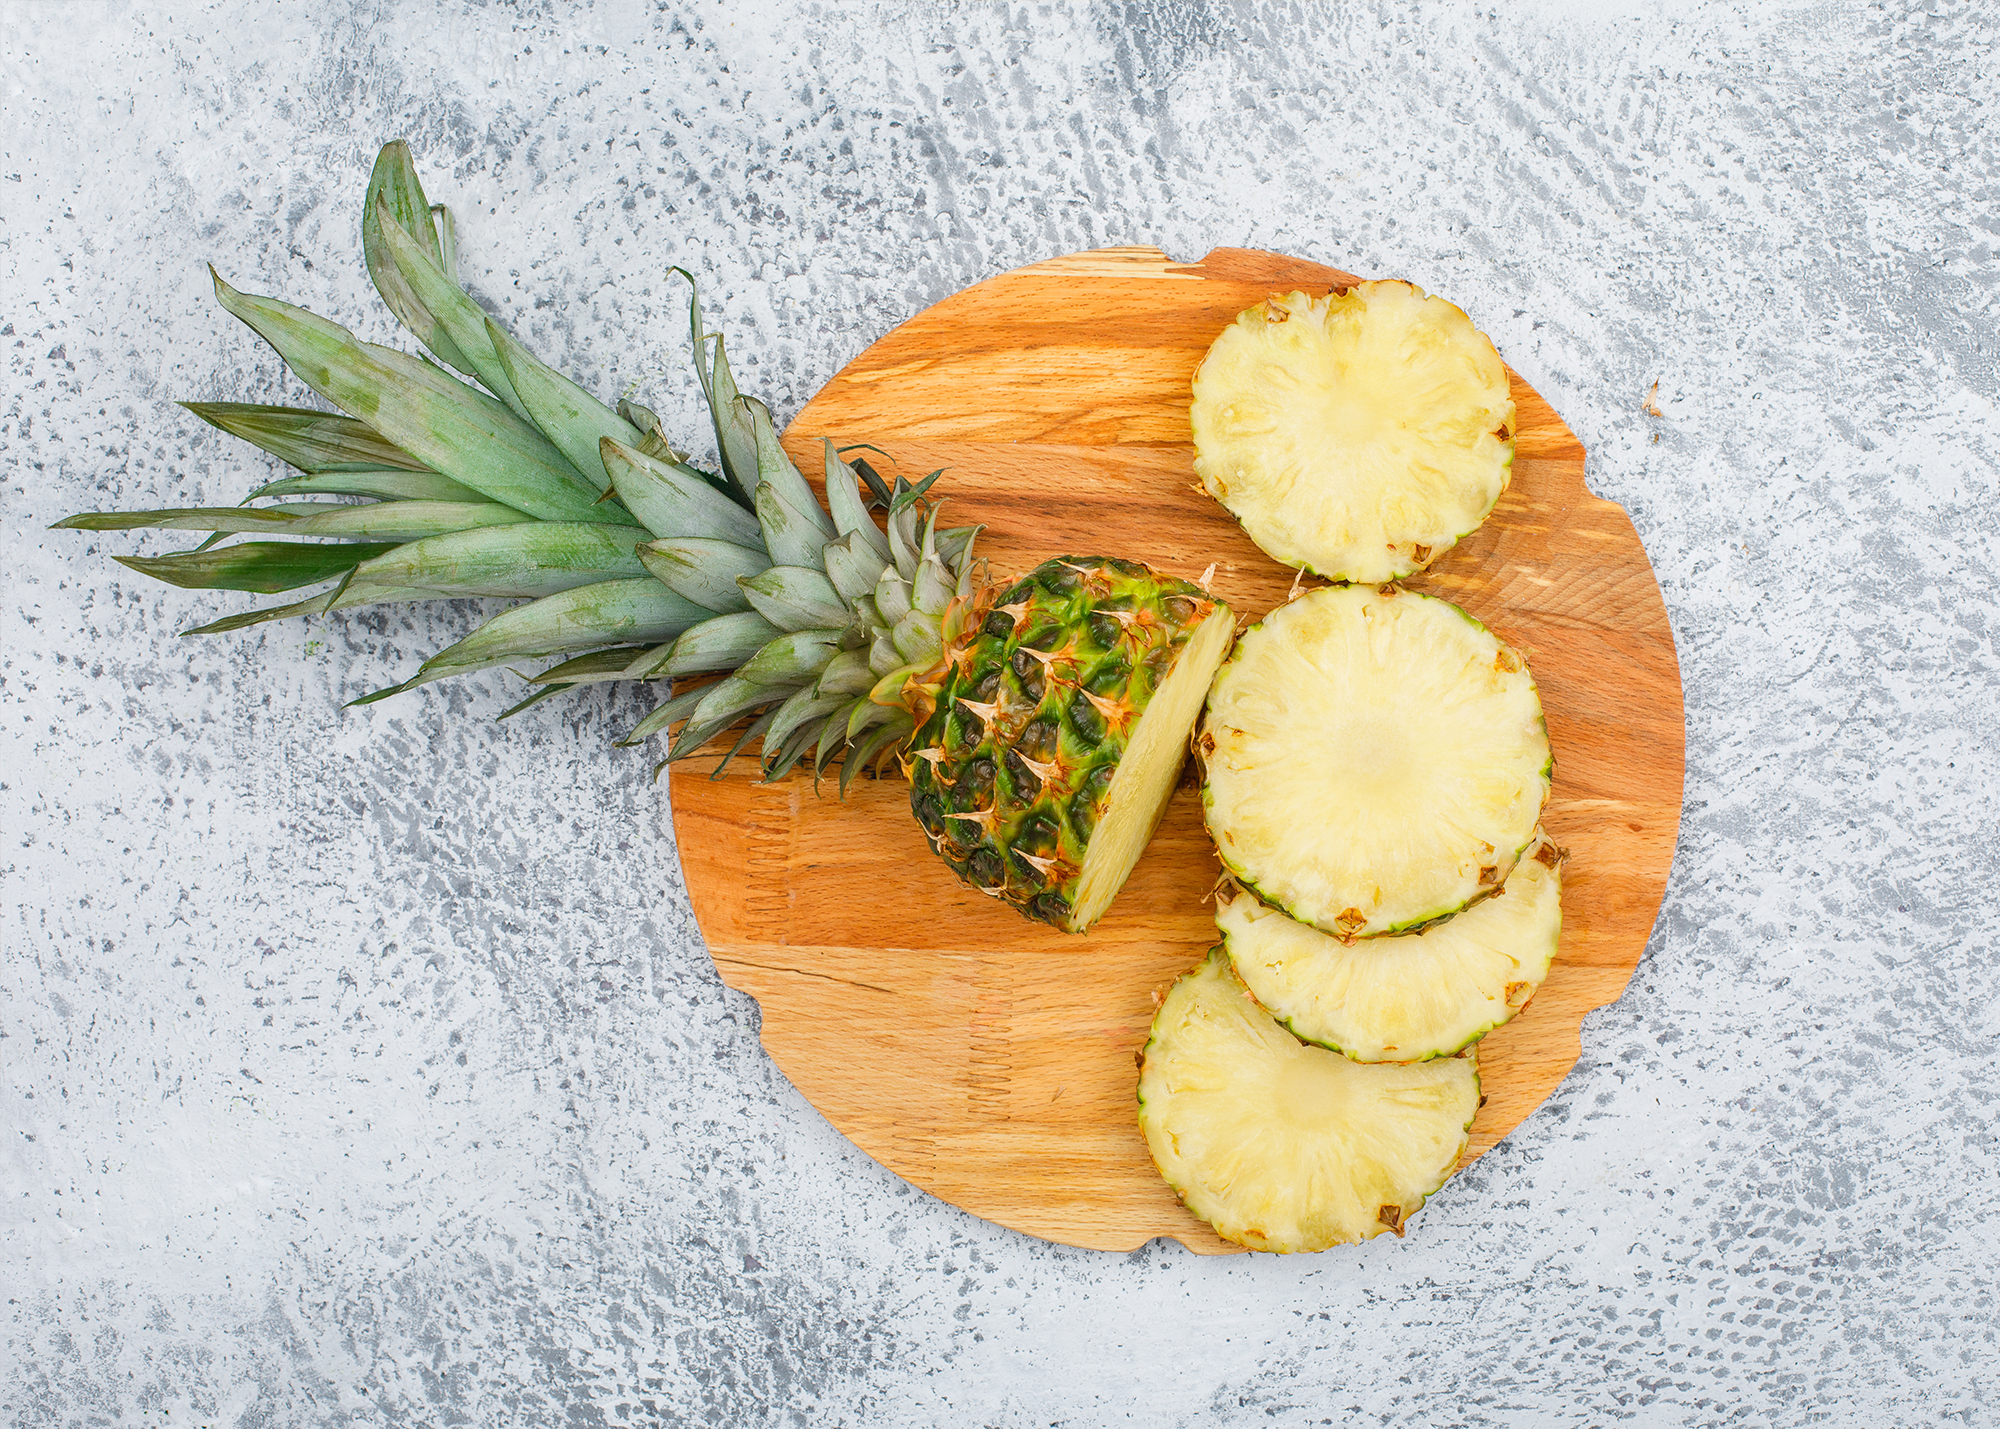 Guide to Cutting a Pineapple